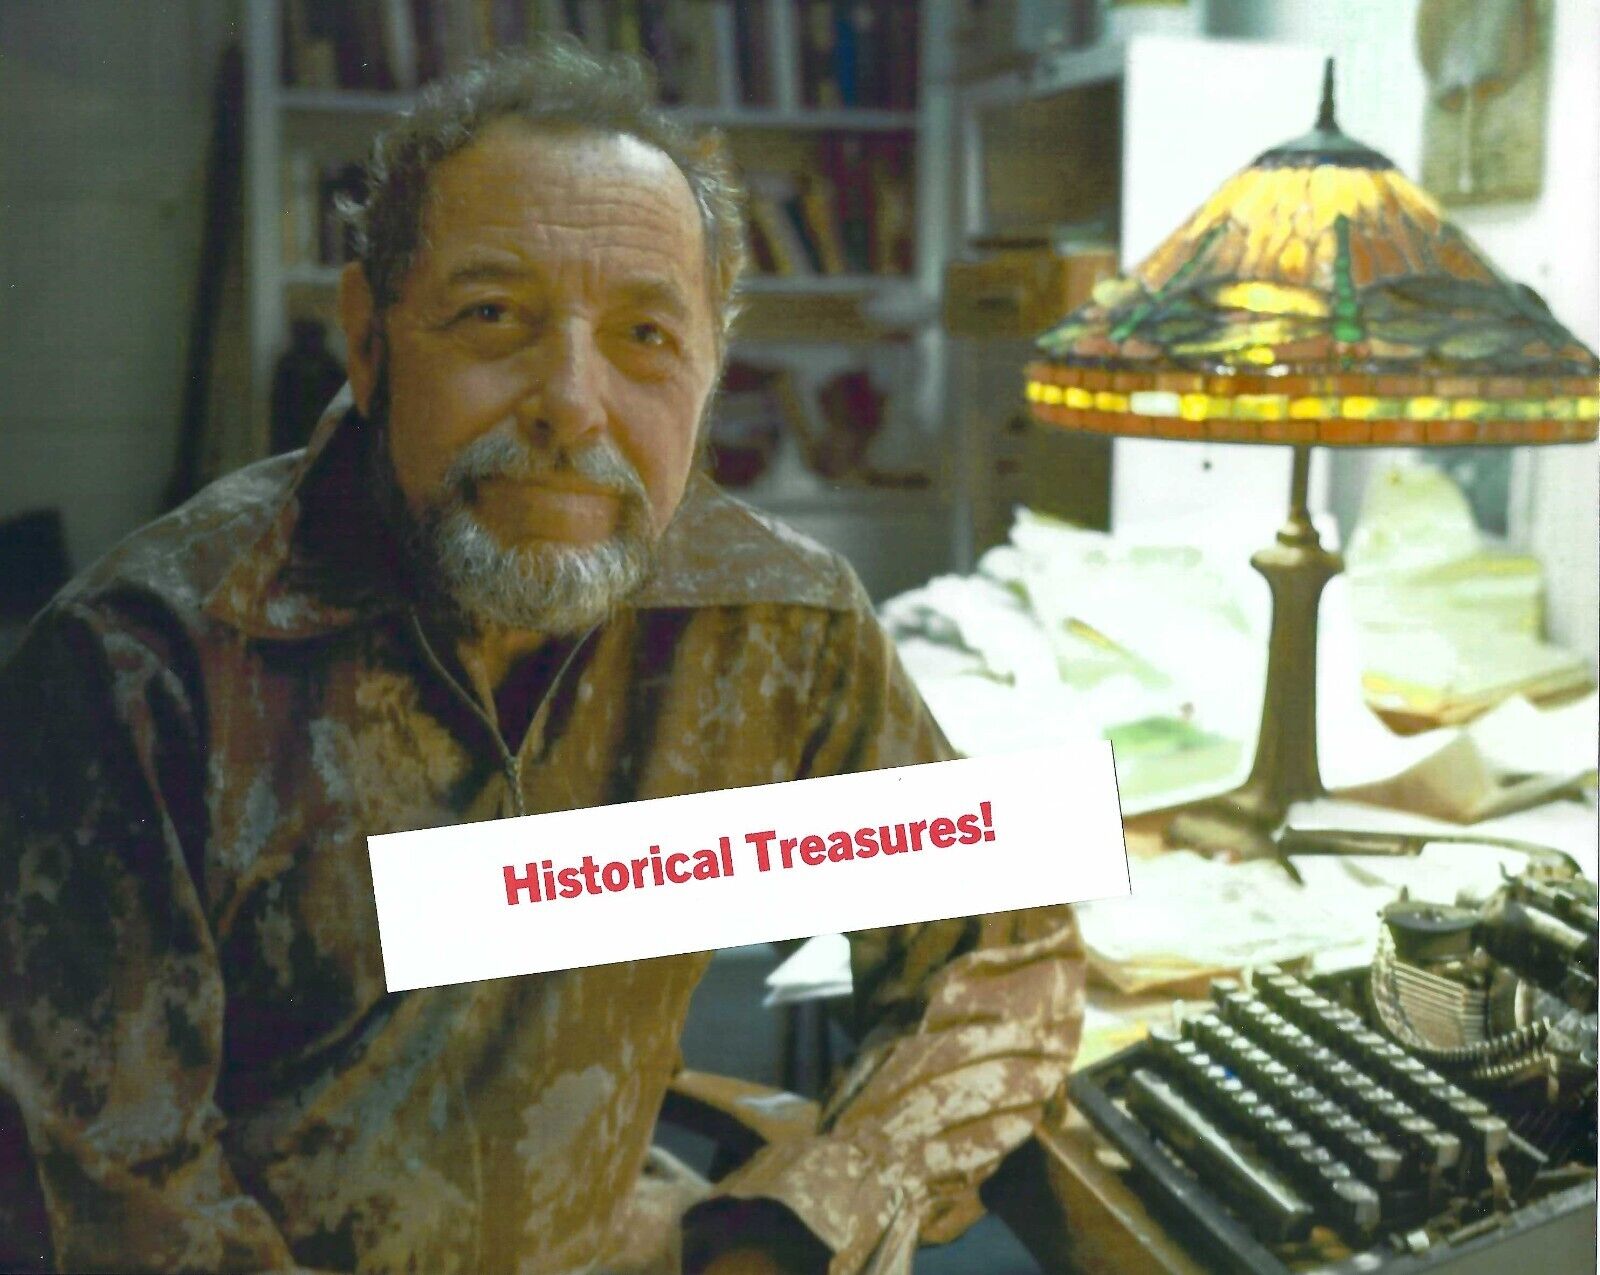 Tennessee Williams Photograph with Typewriter in His Key West Writing Studio